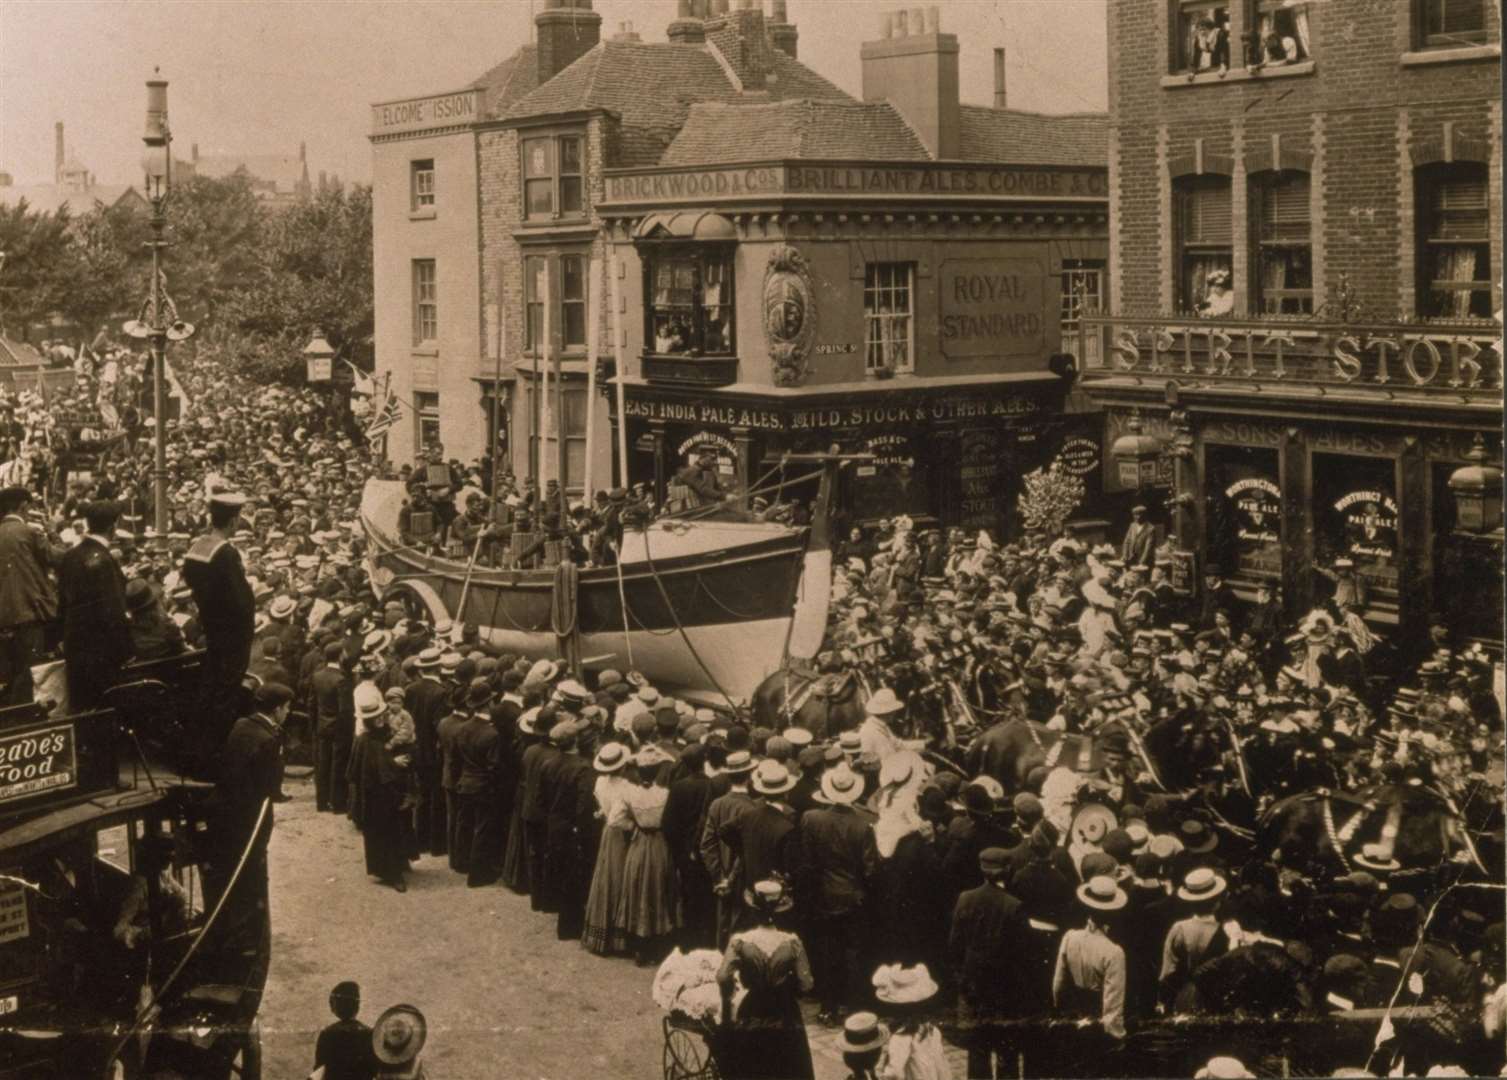 An example of a Lifeboat Saturday parade fundraiser - this one at Southsea where crowds lined the streets in 1902. Image: RNLI.